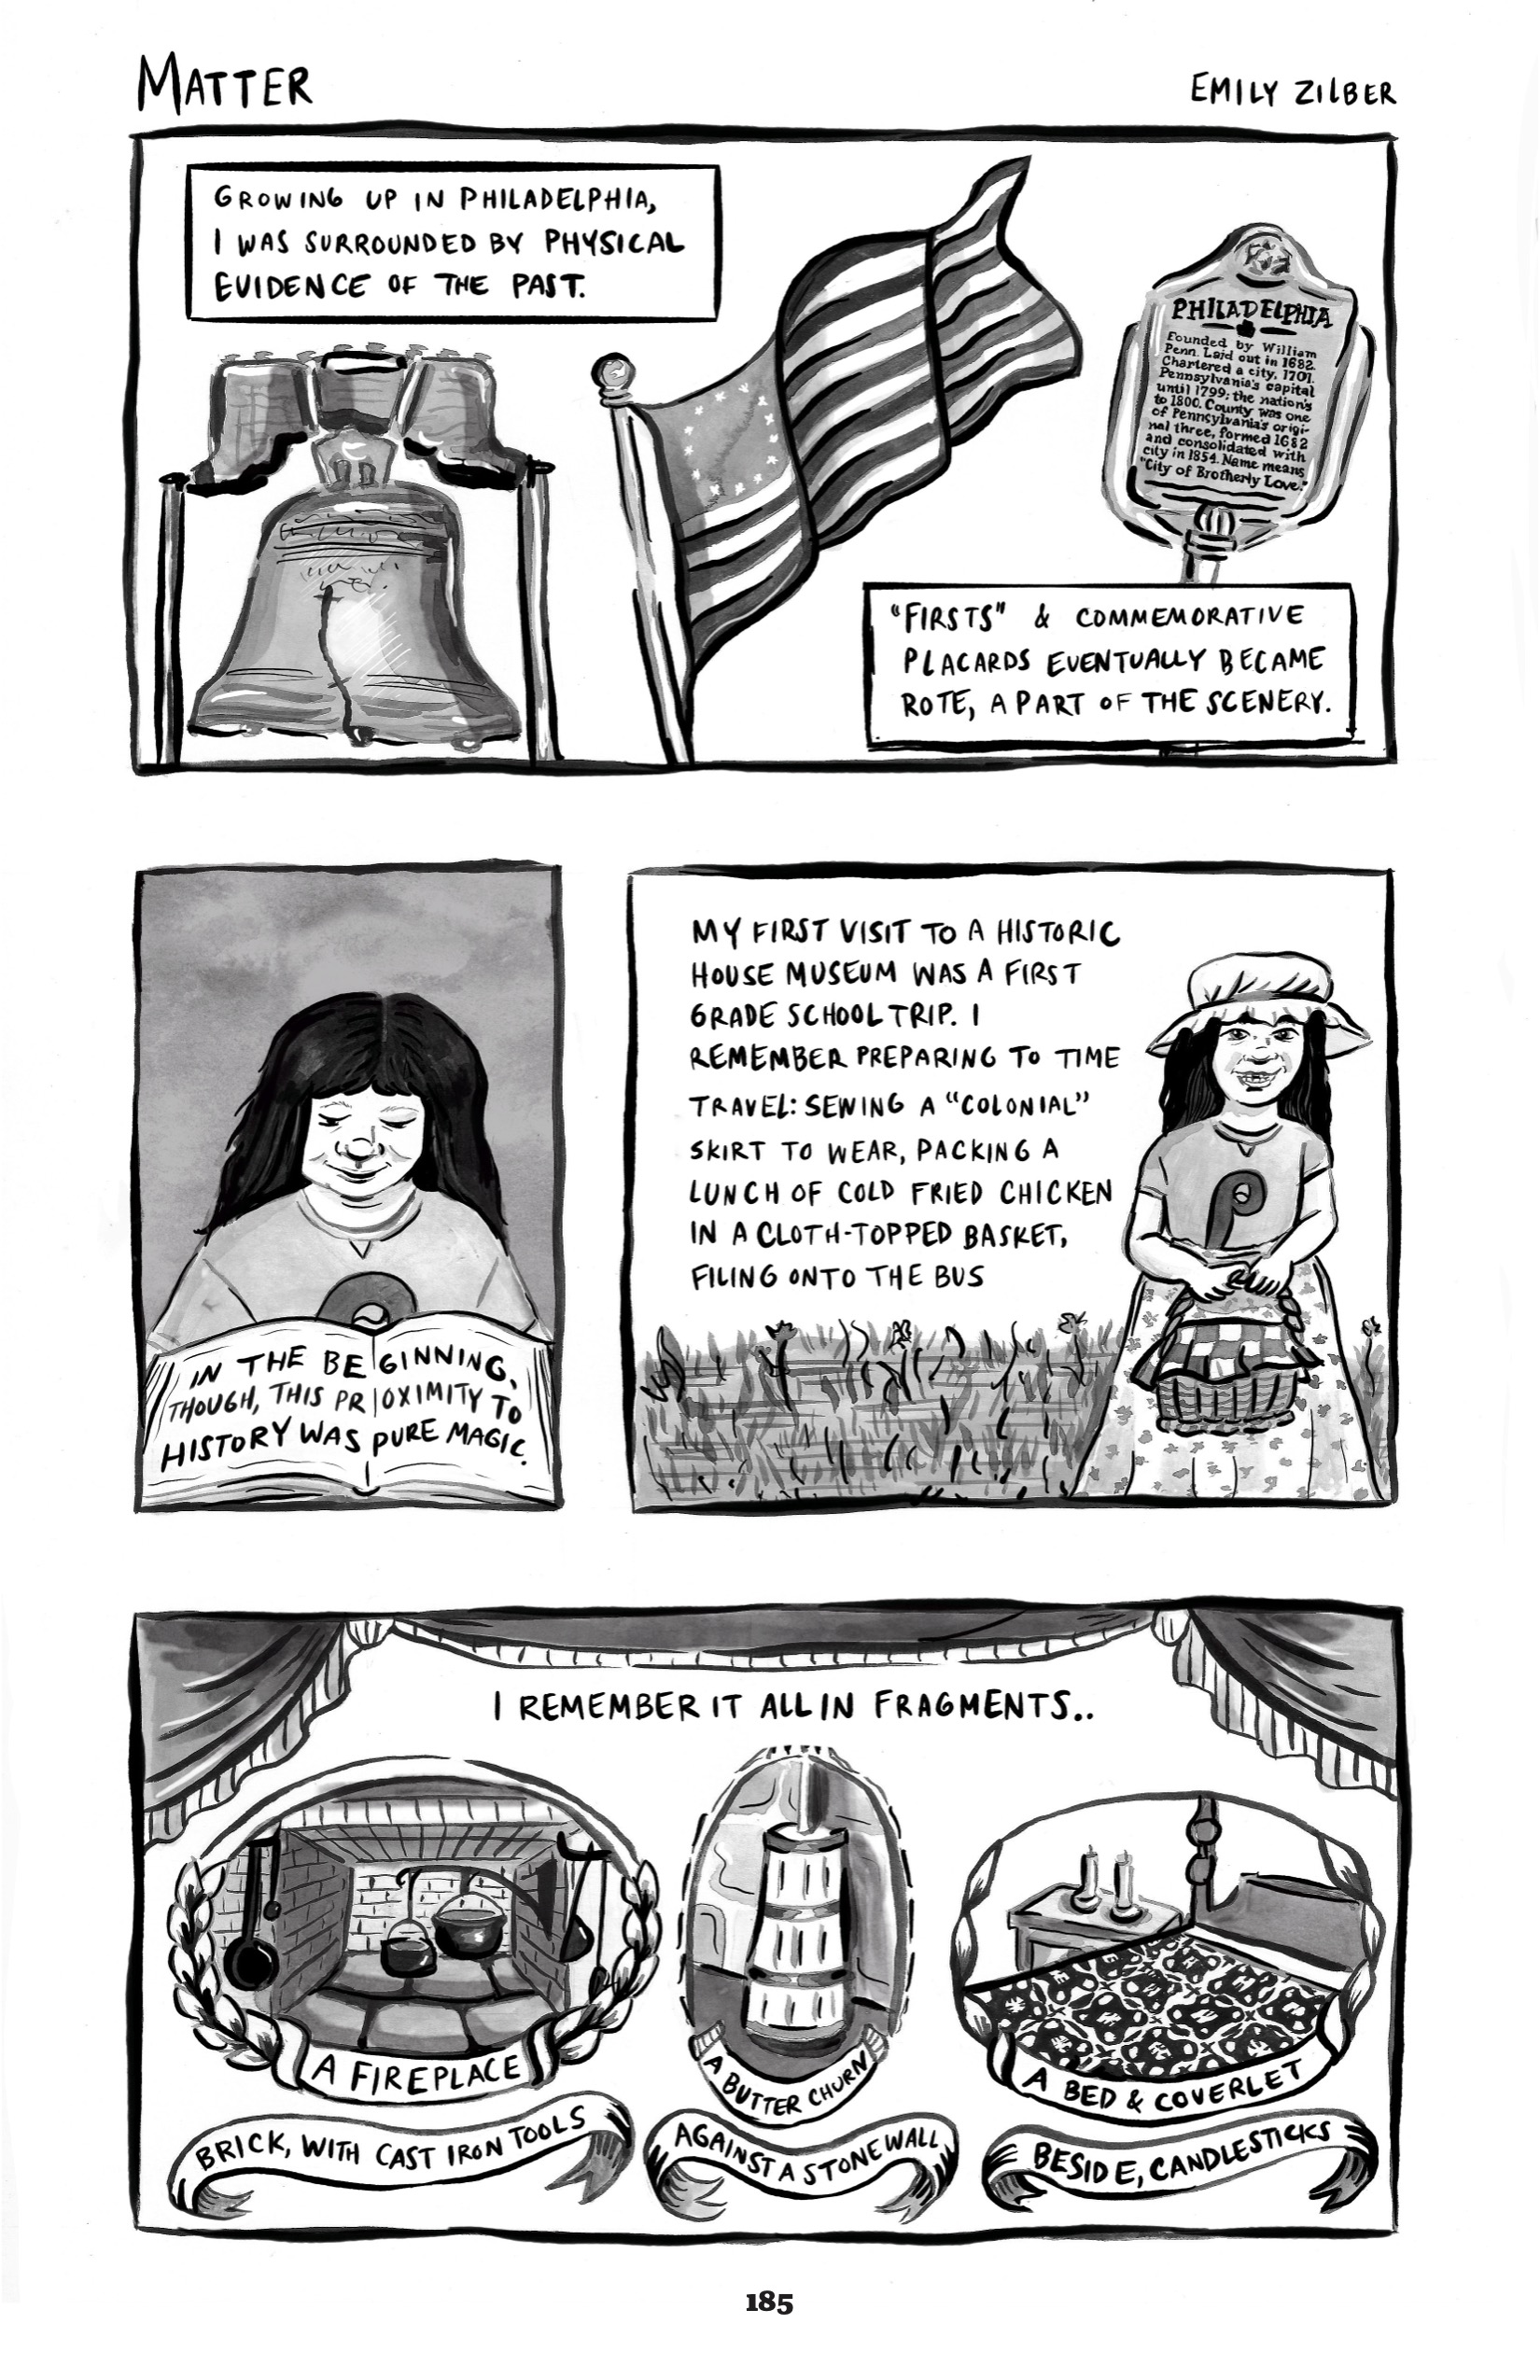 Page one of Matter by Emily Zilber, a comic drawn in black, gray, and white with wet ink.